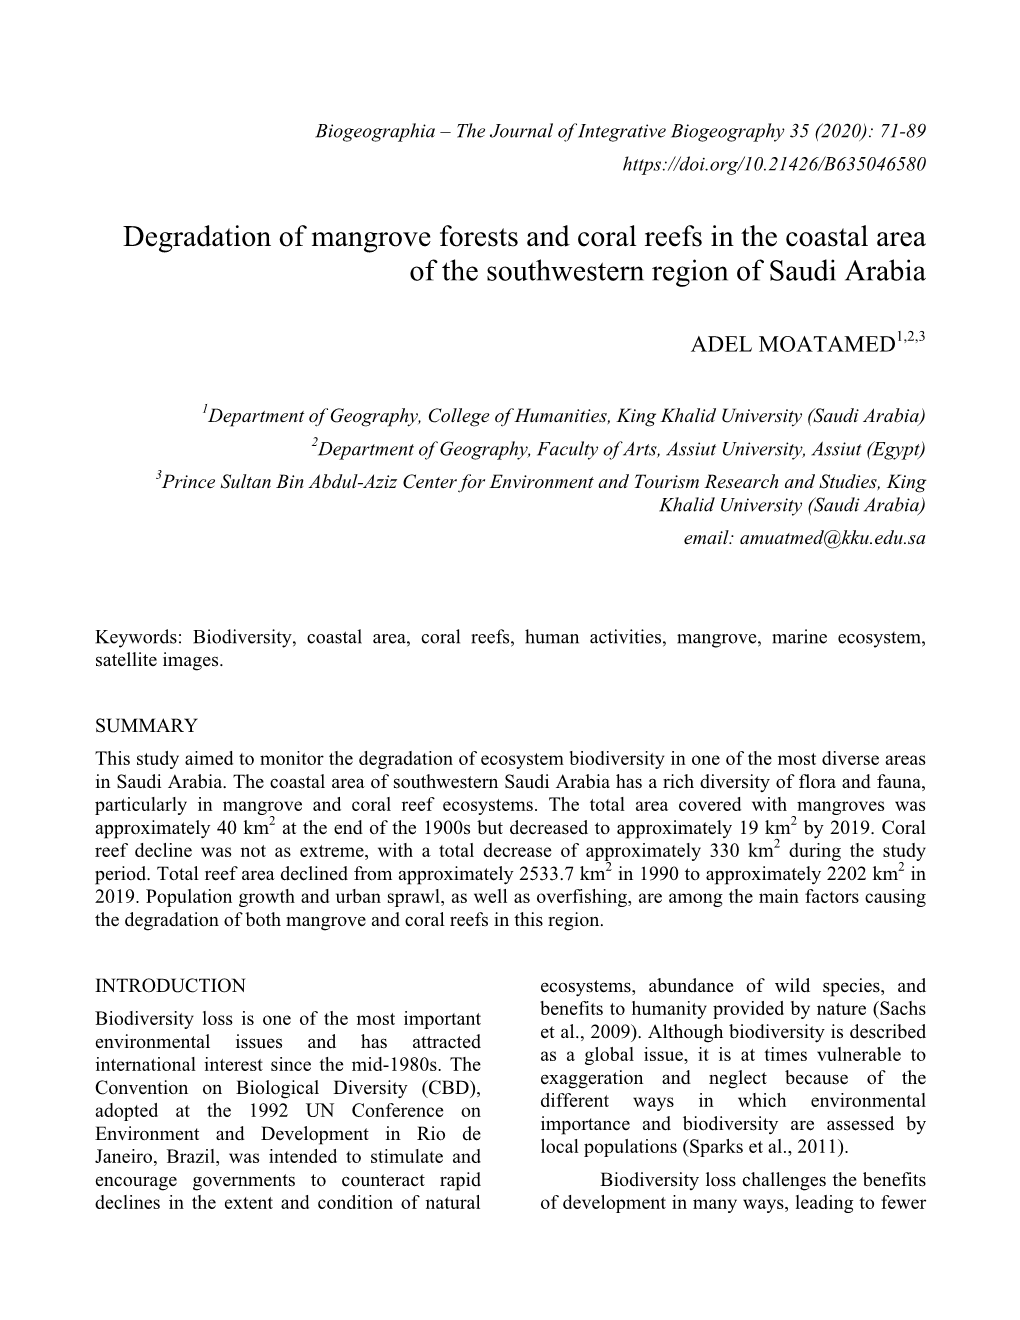 Degradation of Mangrove Forests and Coral Reefs in the Coastal Area of the Southwestern Region of Saudi Arabia